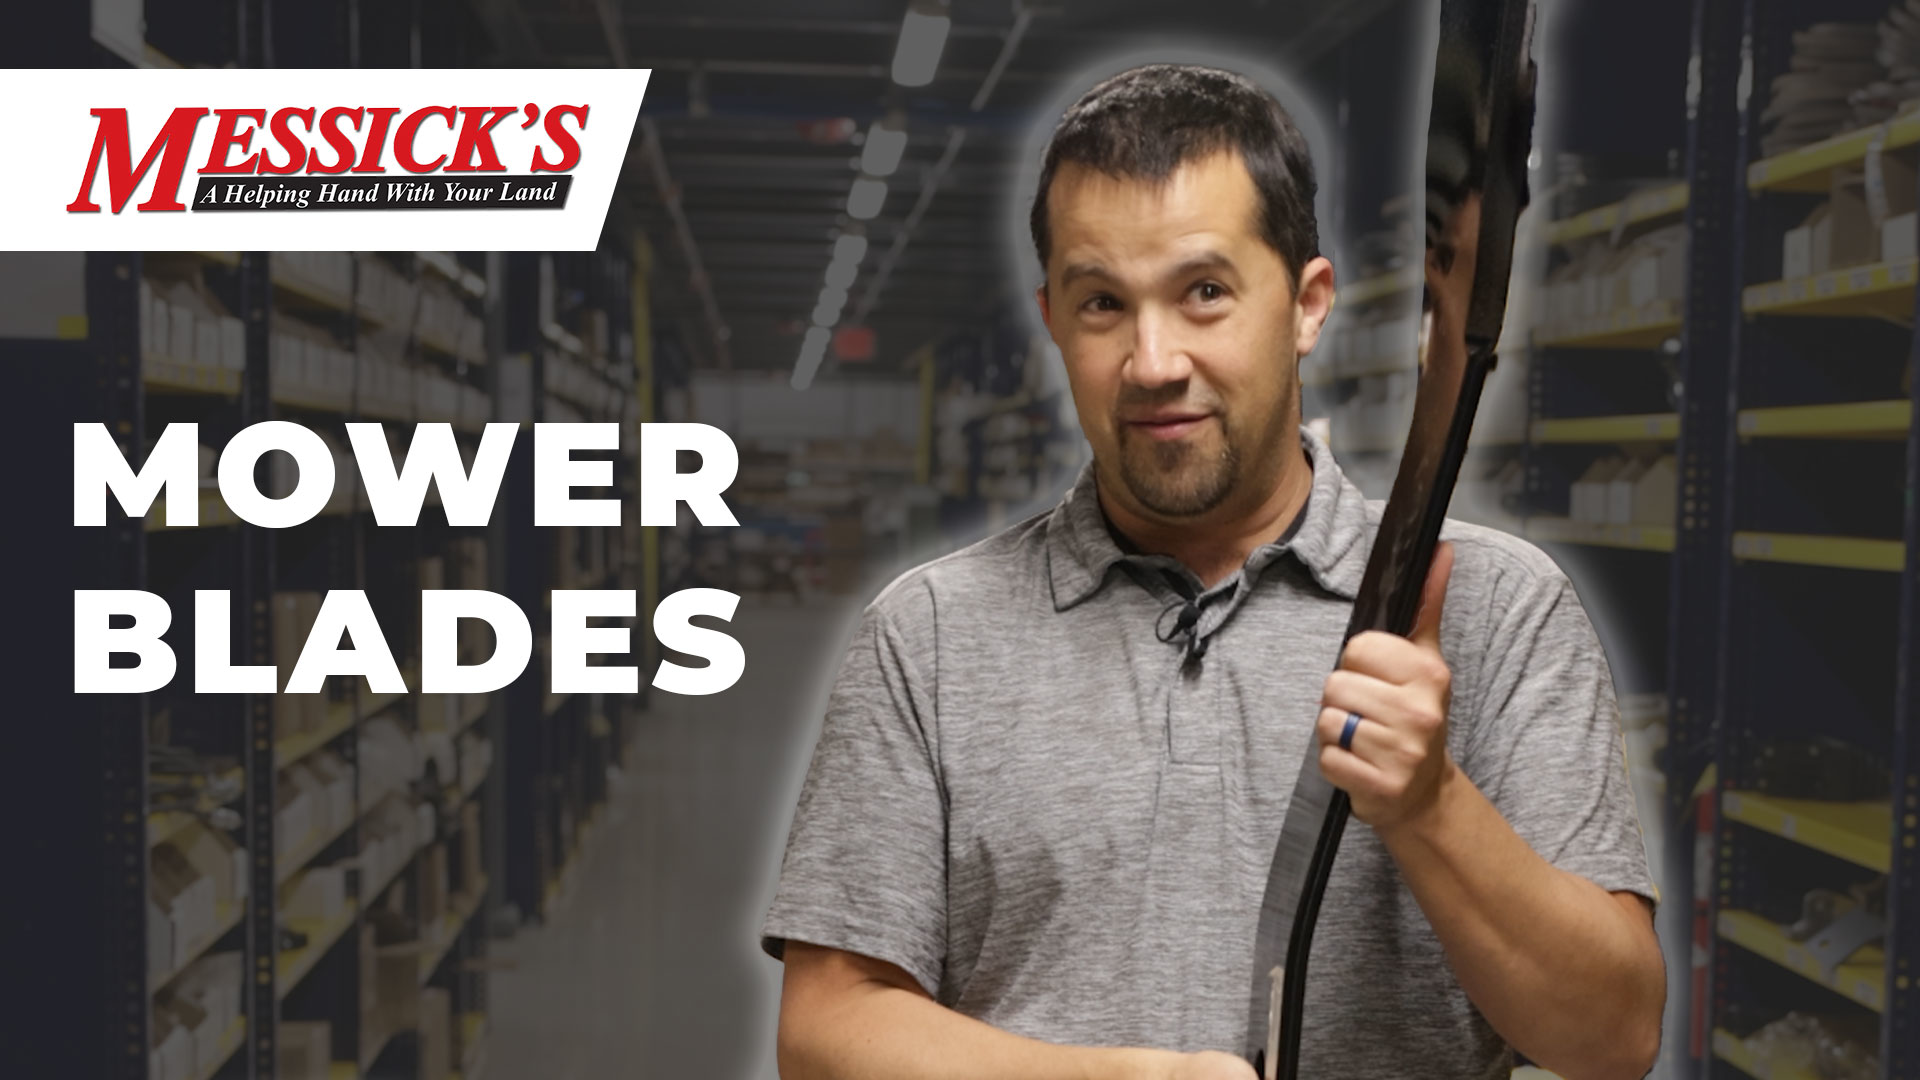 Mower blade differences. Which ones work best